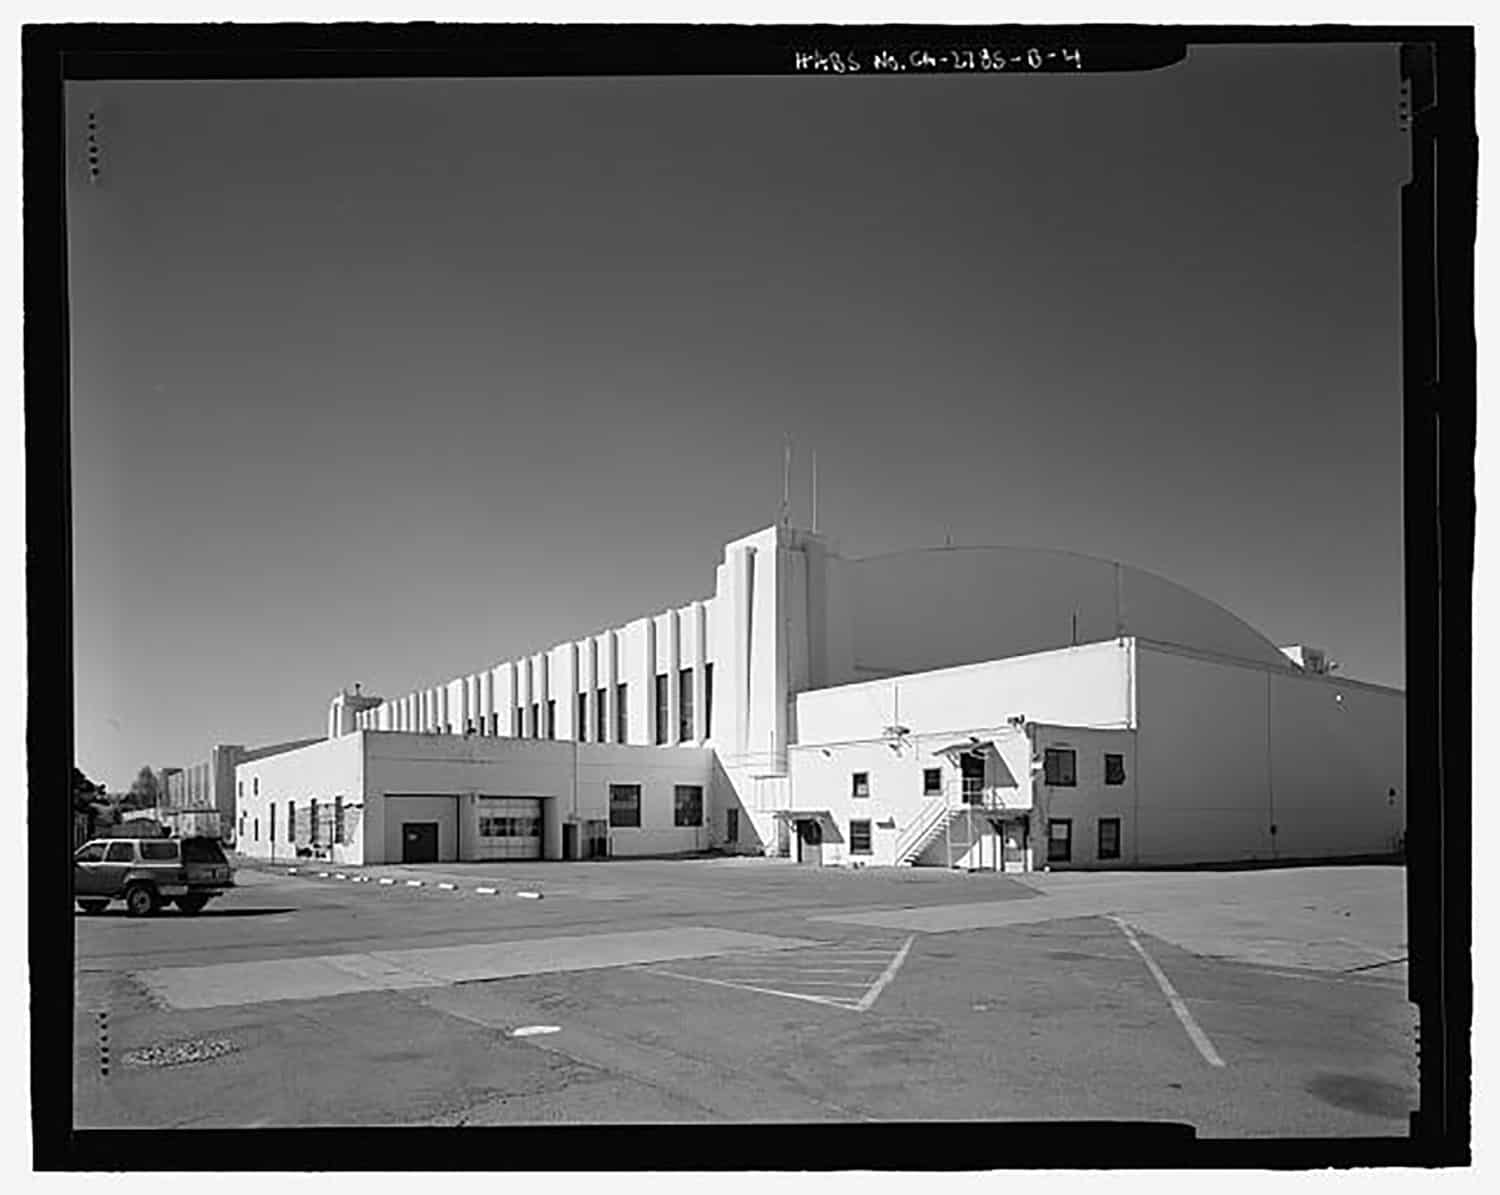 Black and white photo of the aircraft hangar buildings on Treasure Island.